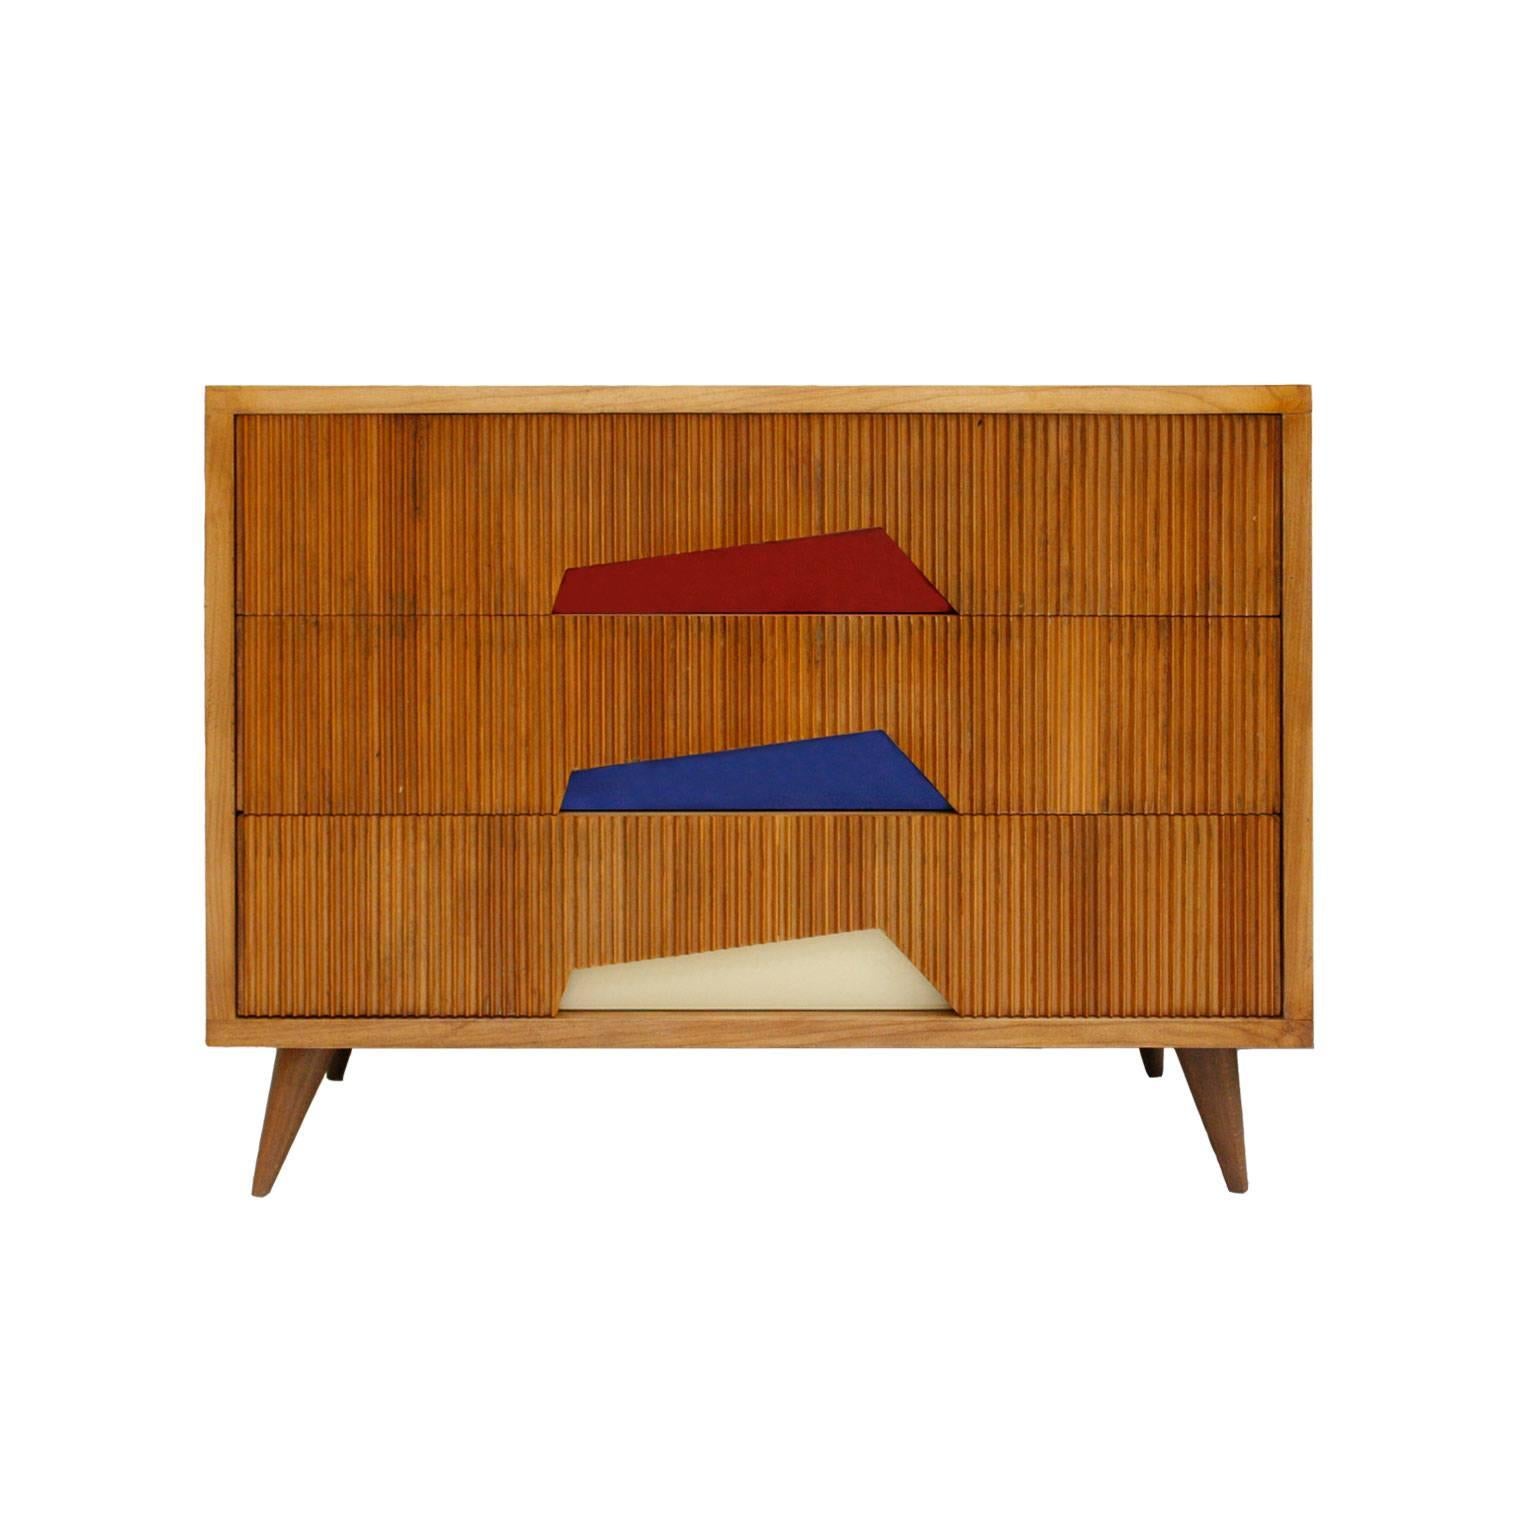 Italian pair of sideboards made in ashwood, with shaped fluted front and handles in Lacobel glass.